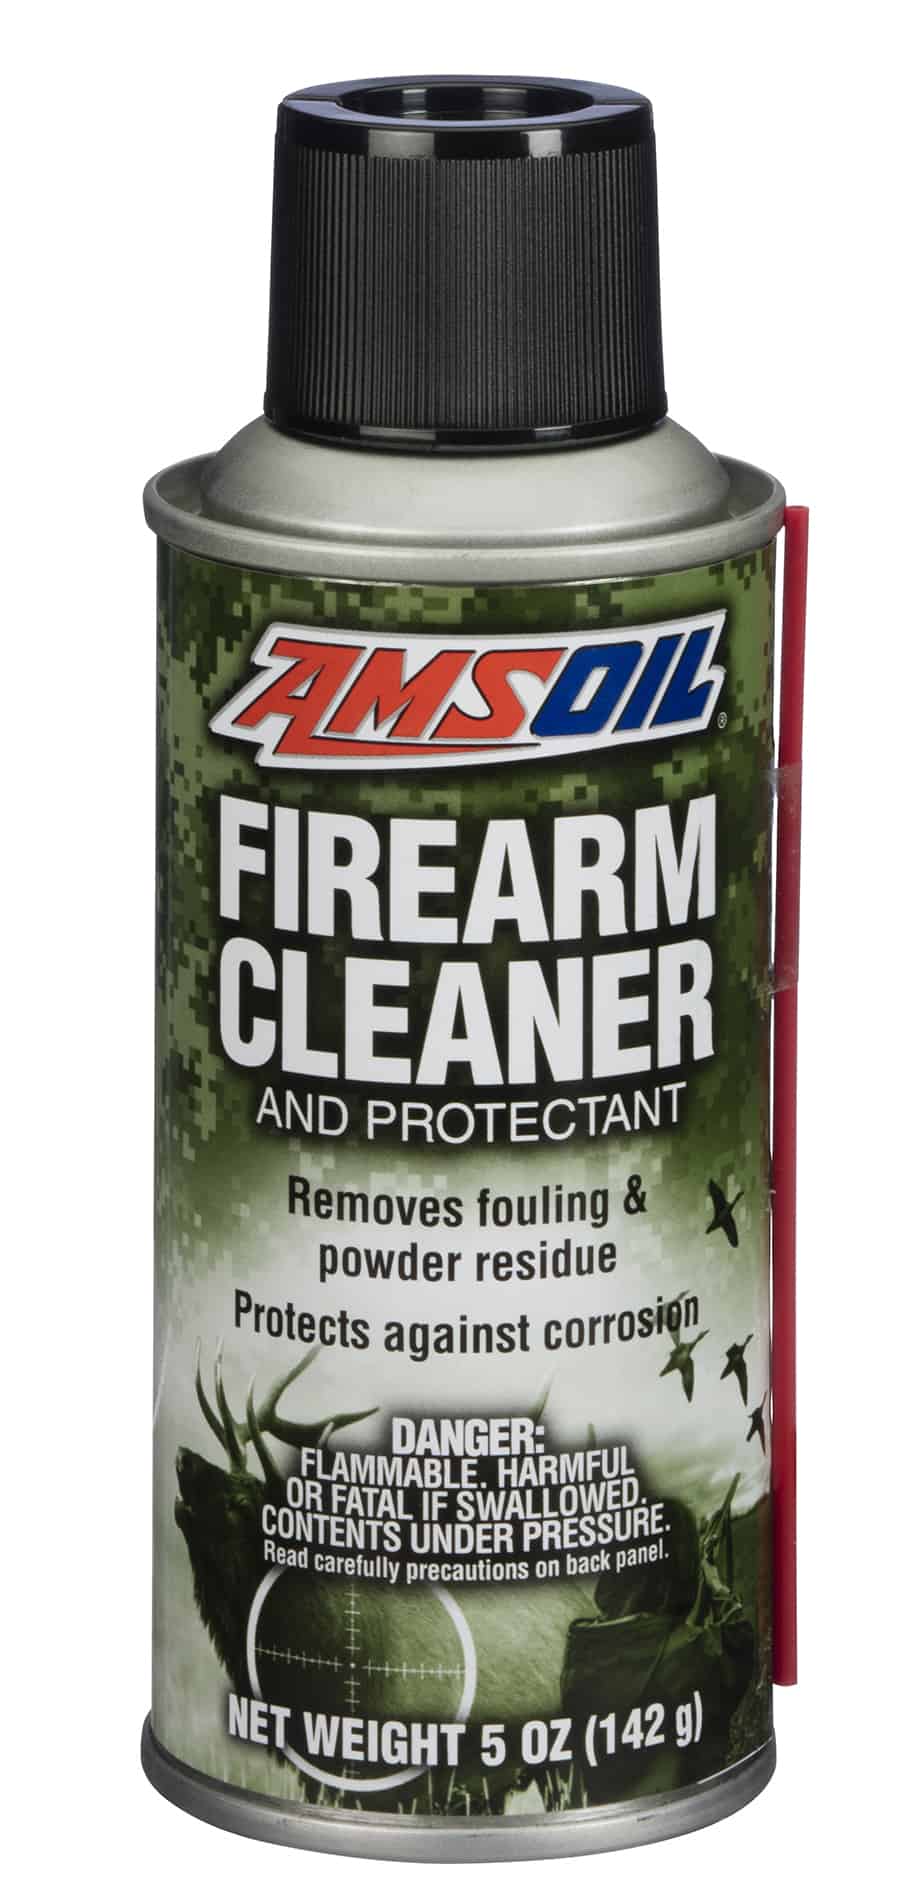 A can of AMSOIL Synthetic Firearm Lubricant & Firearm Cleaner. which present upgrades over all-in-one products, which sacrifice performance for convenience.